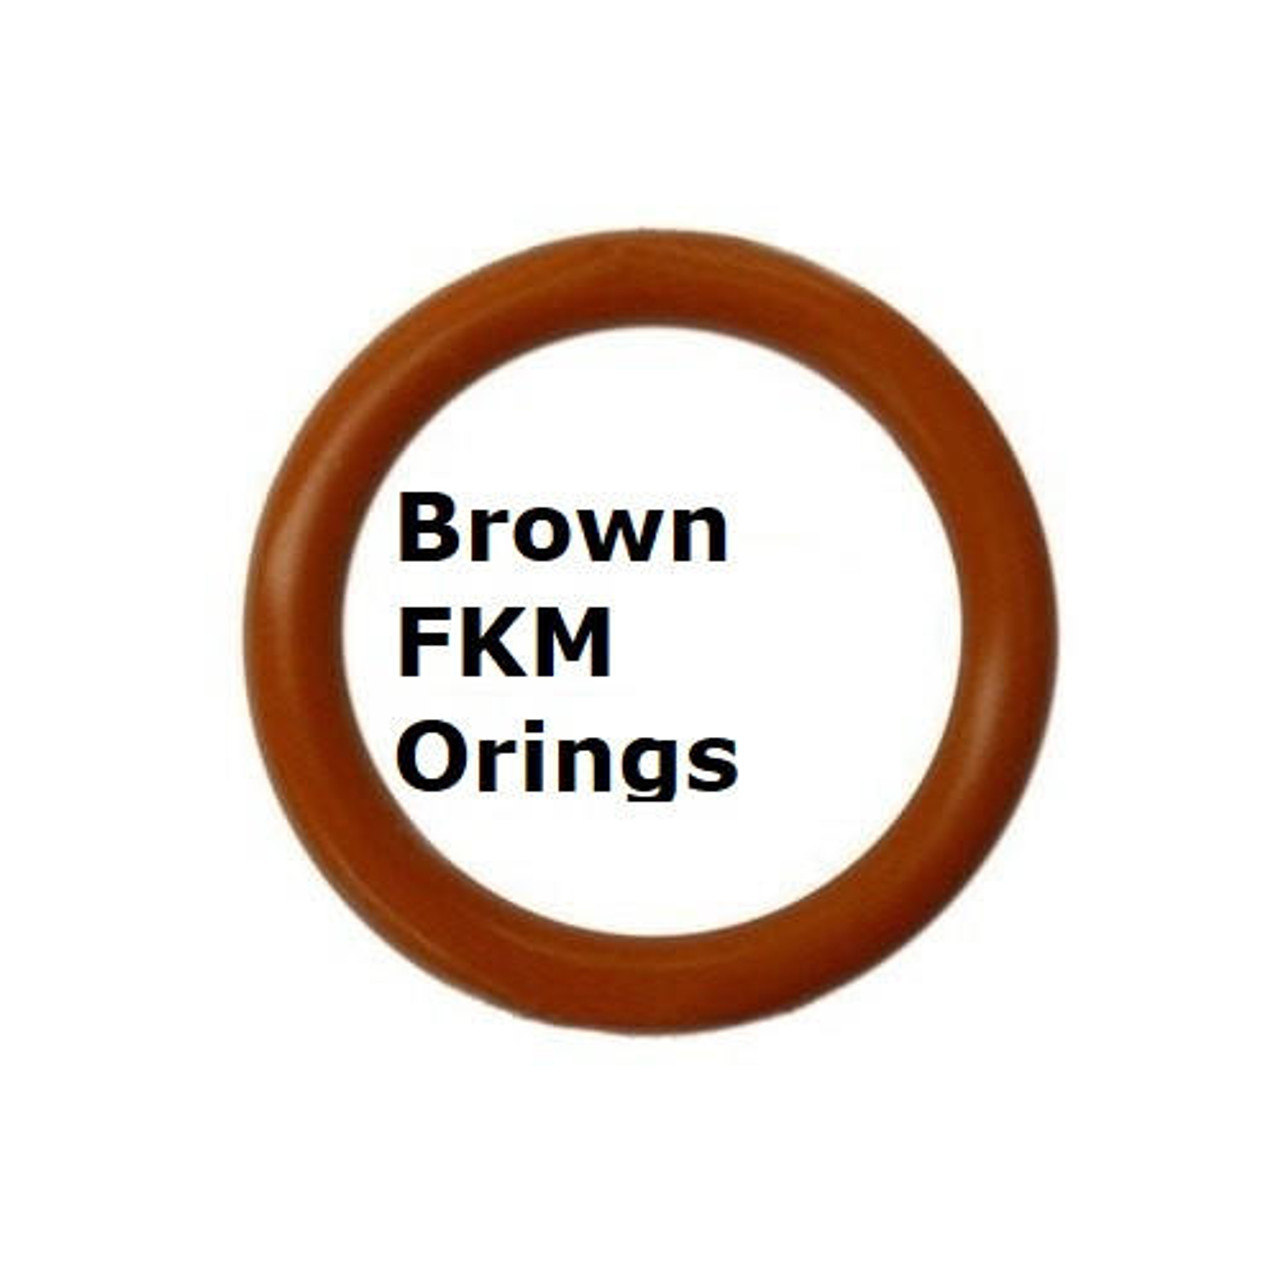 FKM Heat Resistant Brown O-rings  Size 373 Price for 1 pc